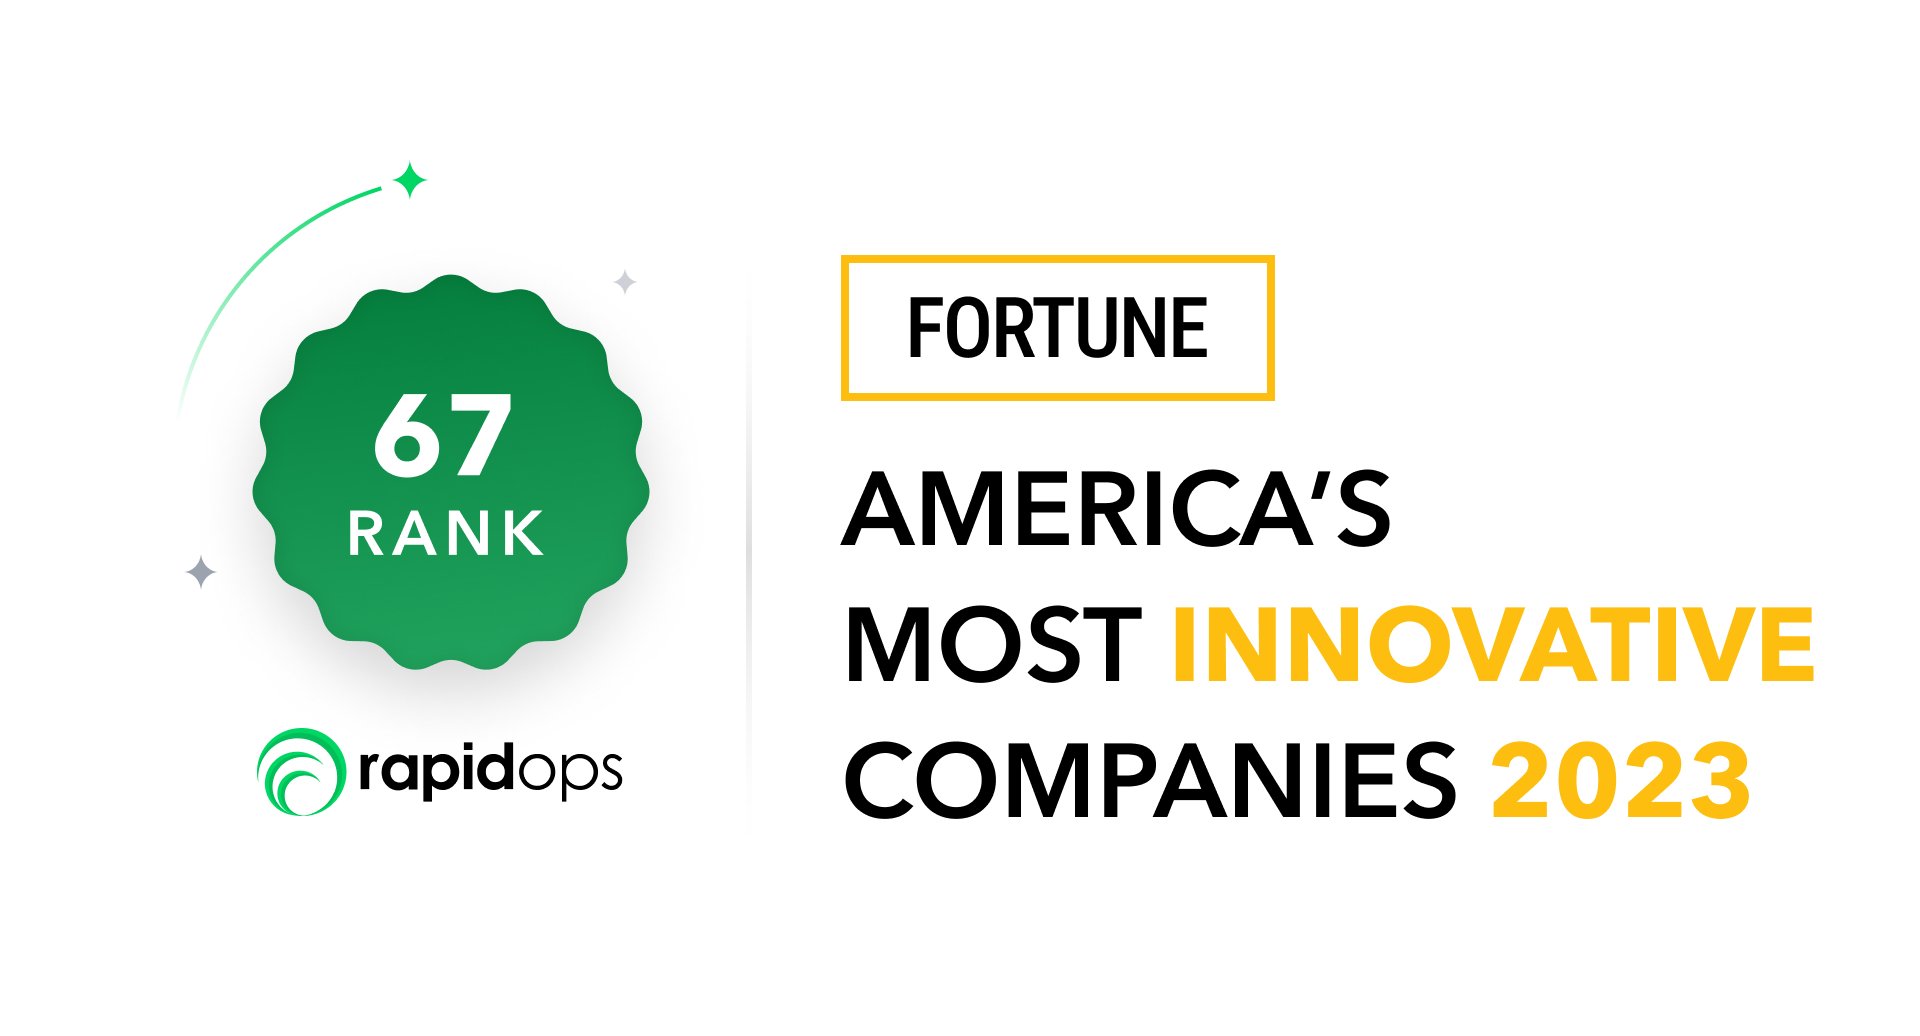 Inner Image 2 - Ranked 67th on Fortune’s Premier America’s Most Innovative Companies 2023